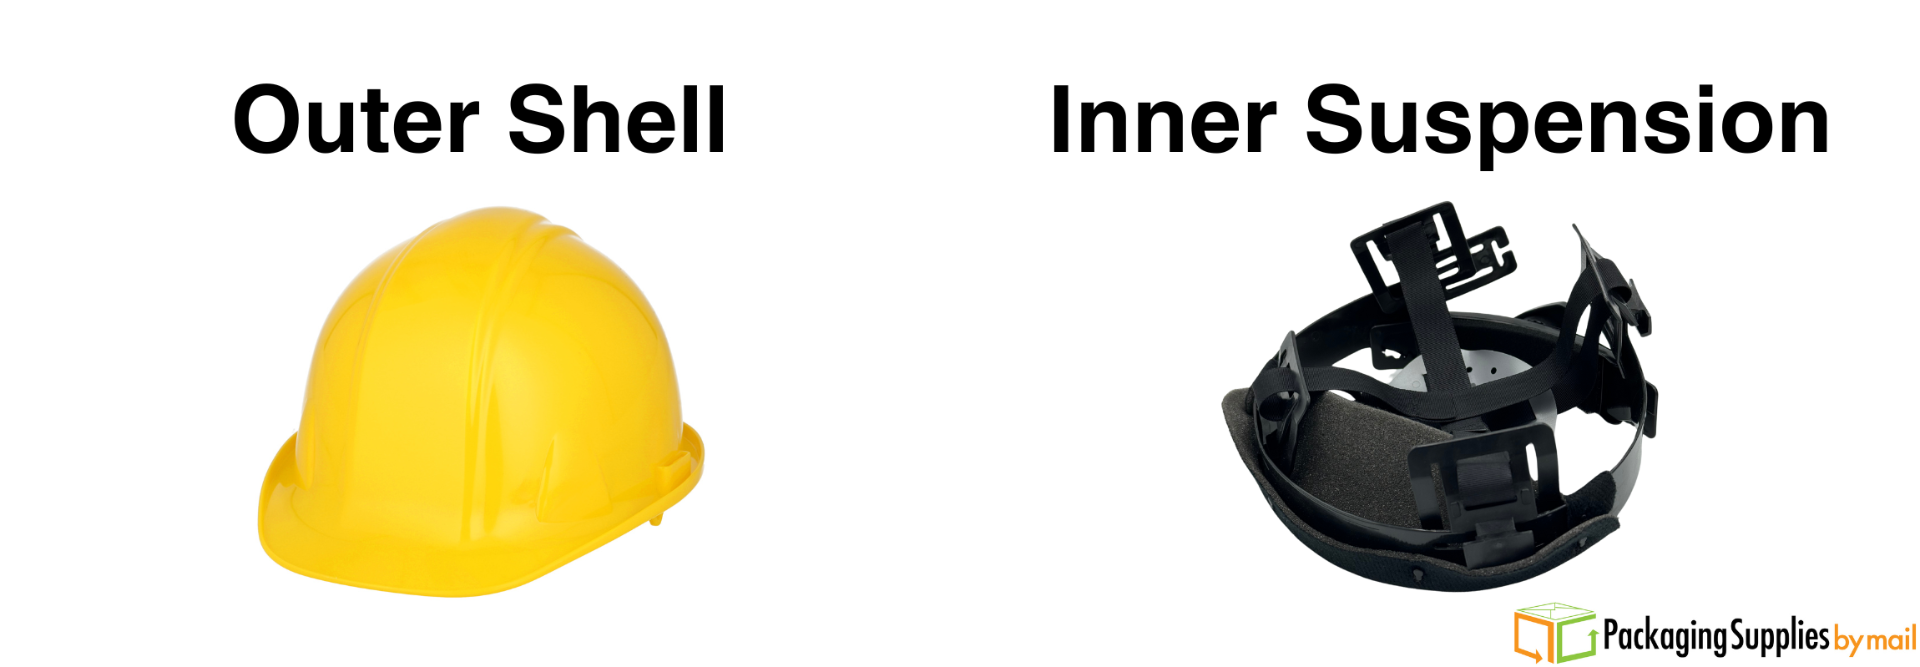 Hard Hat Outer Shell and Inner Suspension